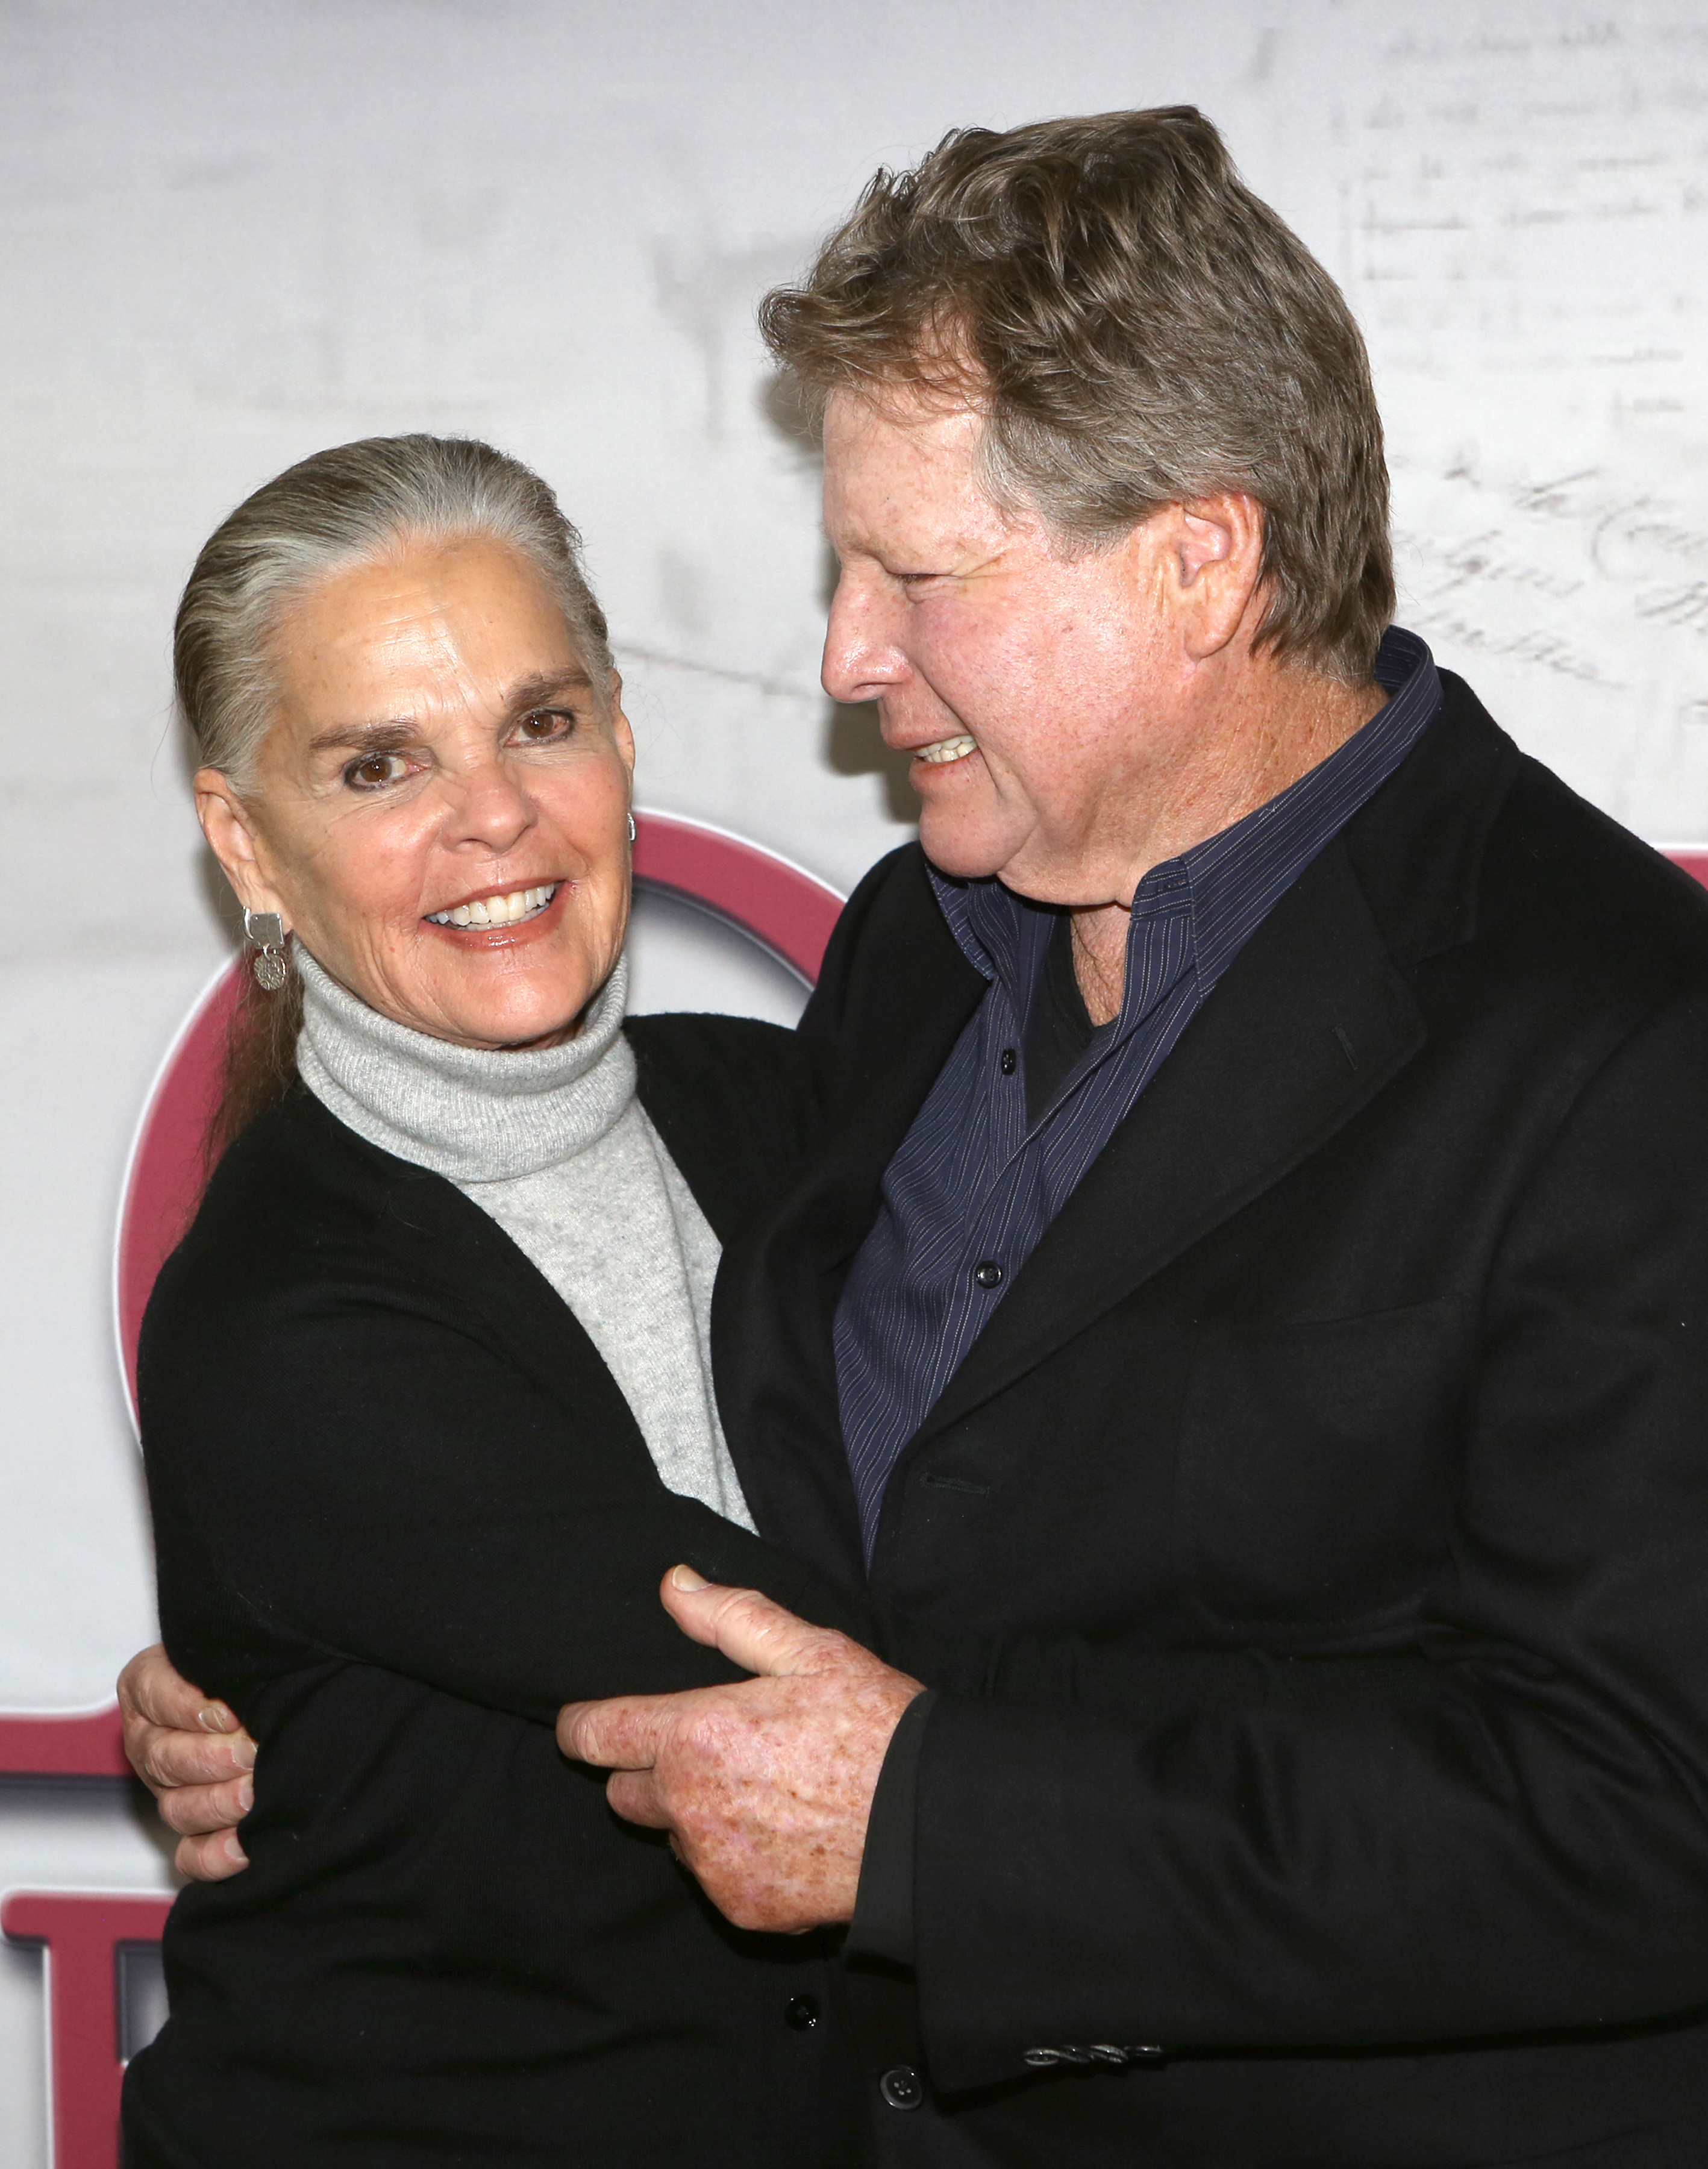 Ali MacGraw and Ryan O'Neal on February 24, 2015, in New York City. | Source: Getty Images